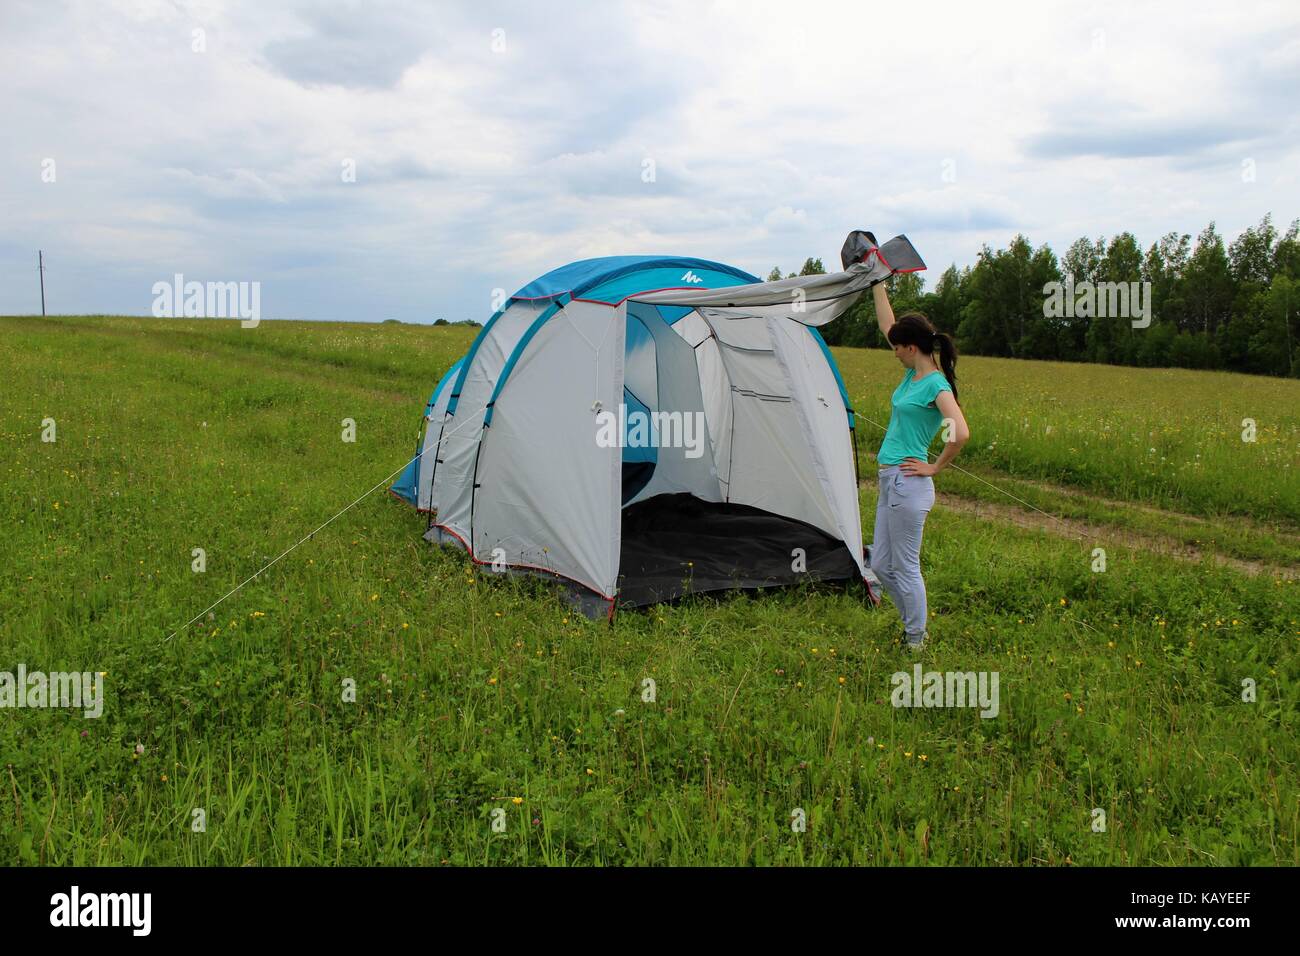 A young girl lifts the canopy of a white-blue tourist tent set on a green meadow against a forest background. Stock Photo